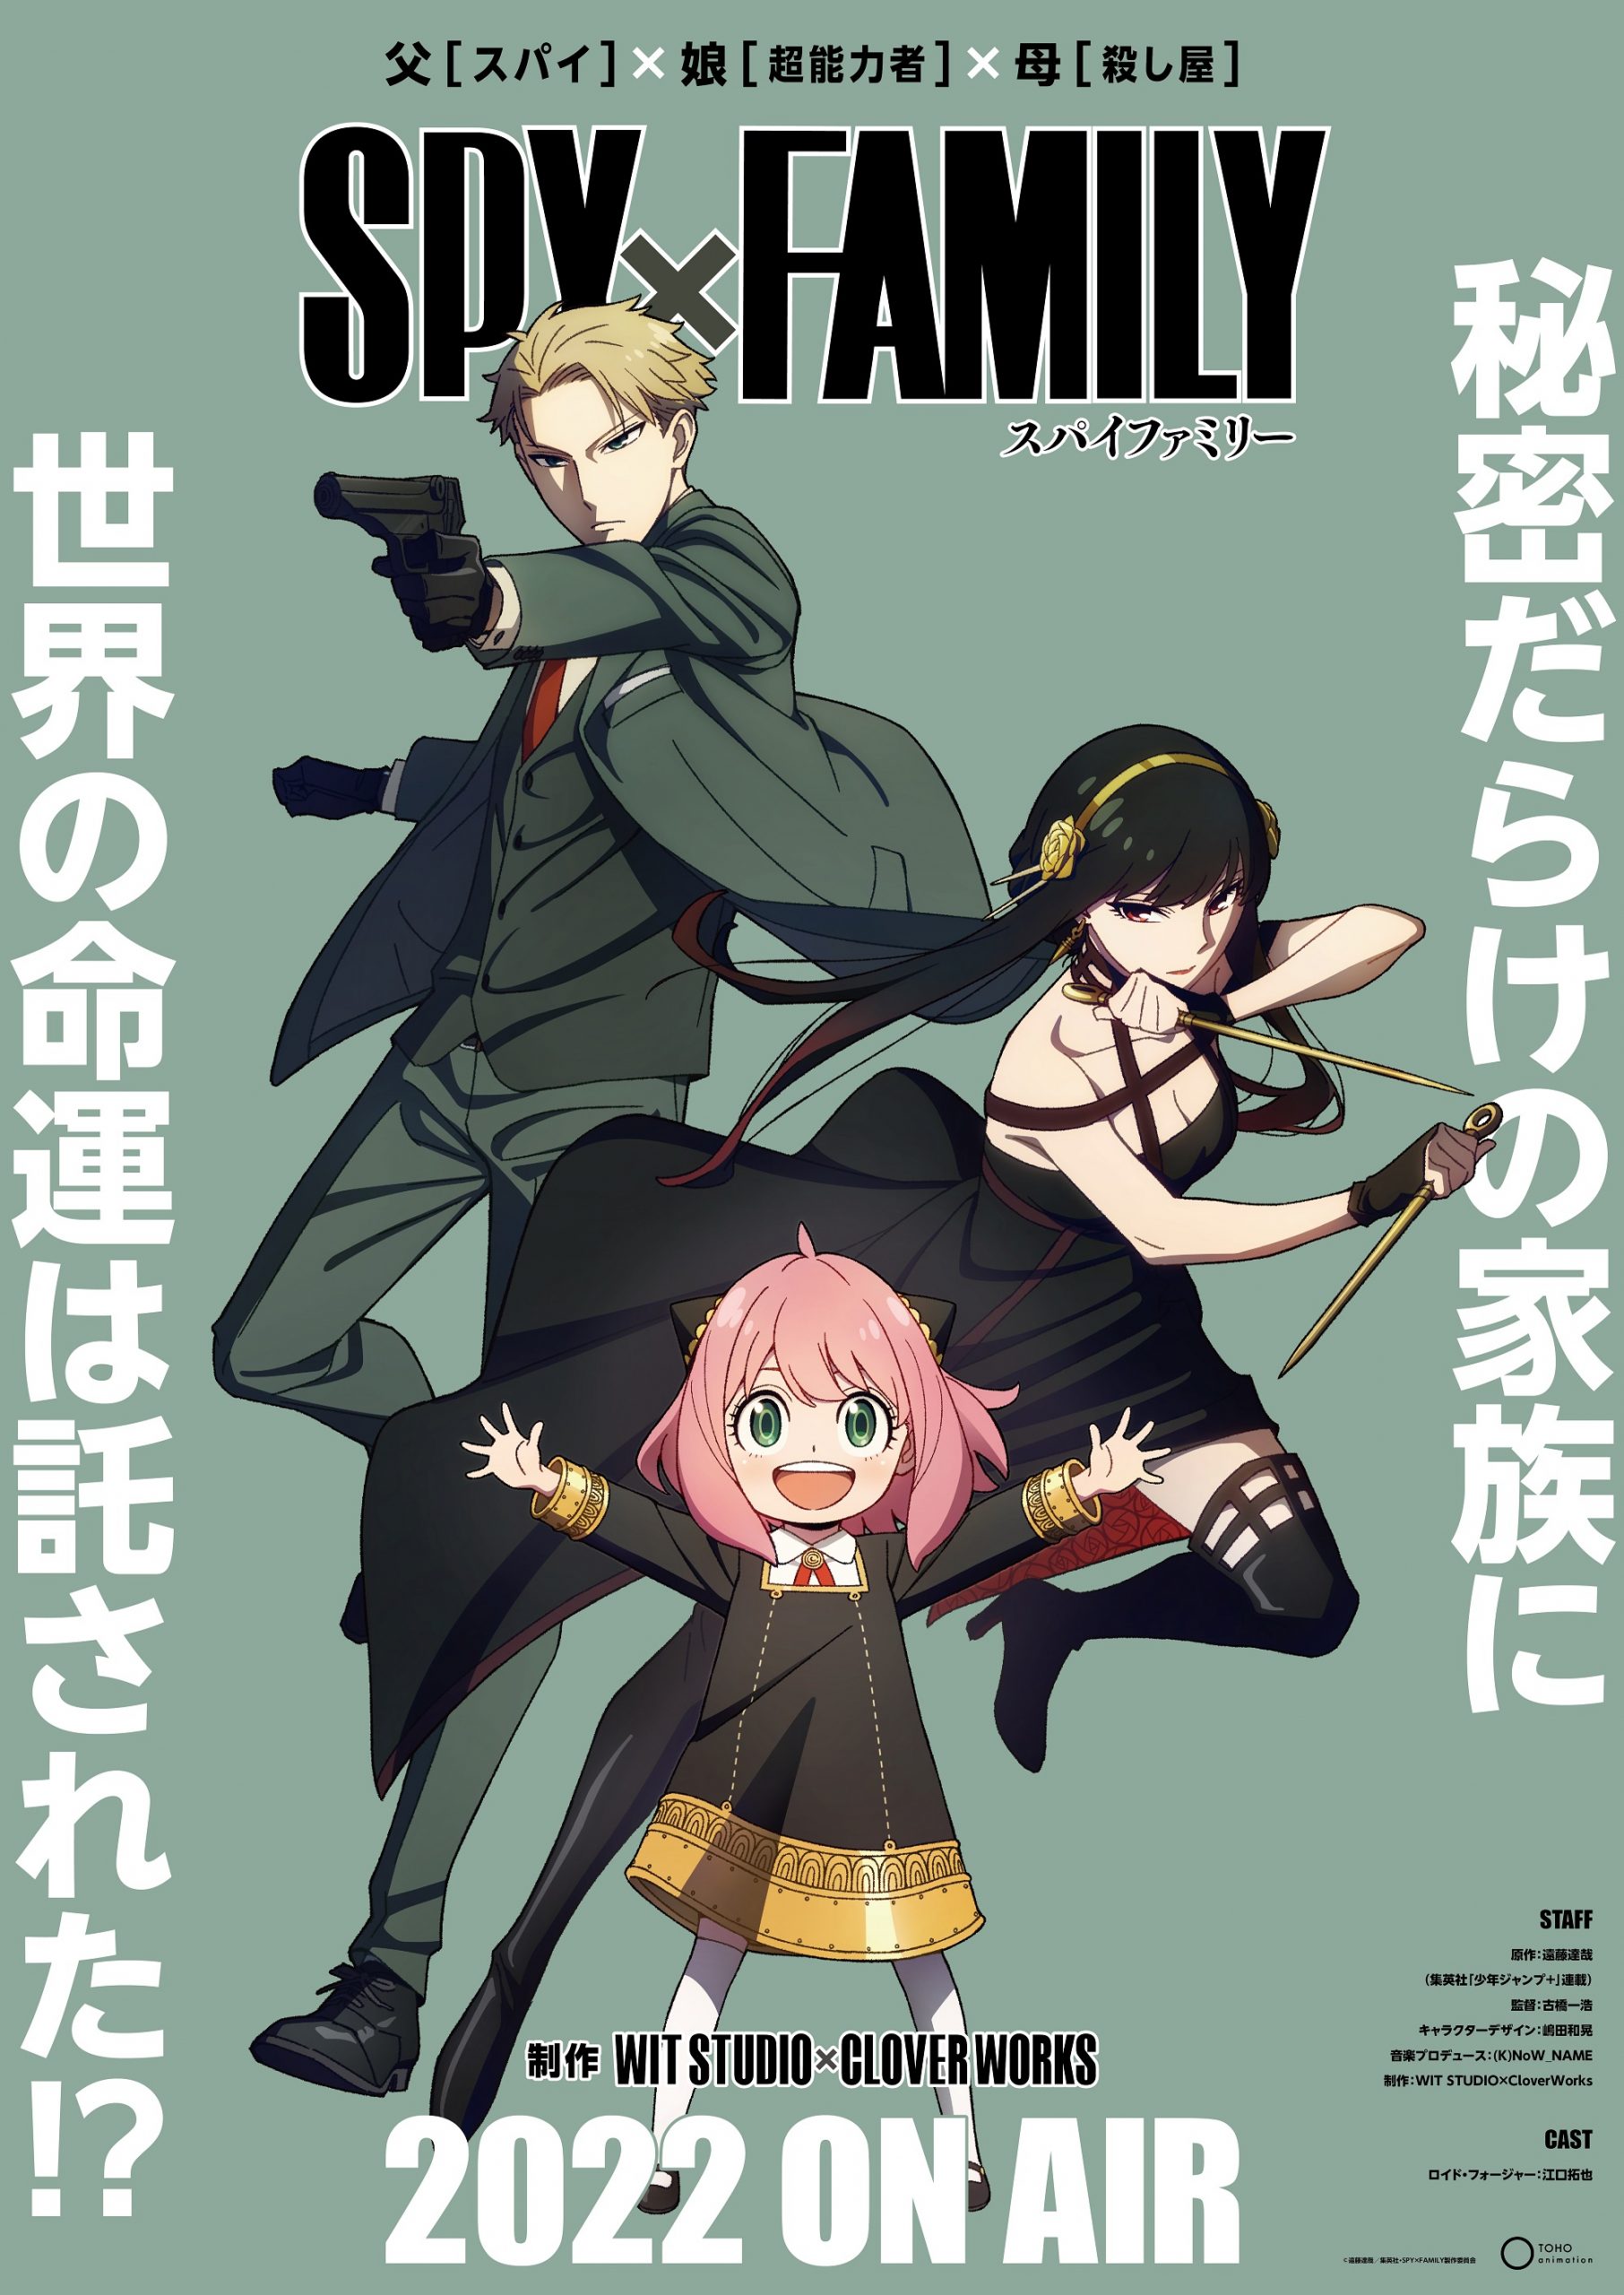 spyxfamily-kv-scaled New Promo Video and Cast for "SPY×FAMILY" Revealed, Confirmed for Spring 2022!